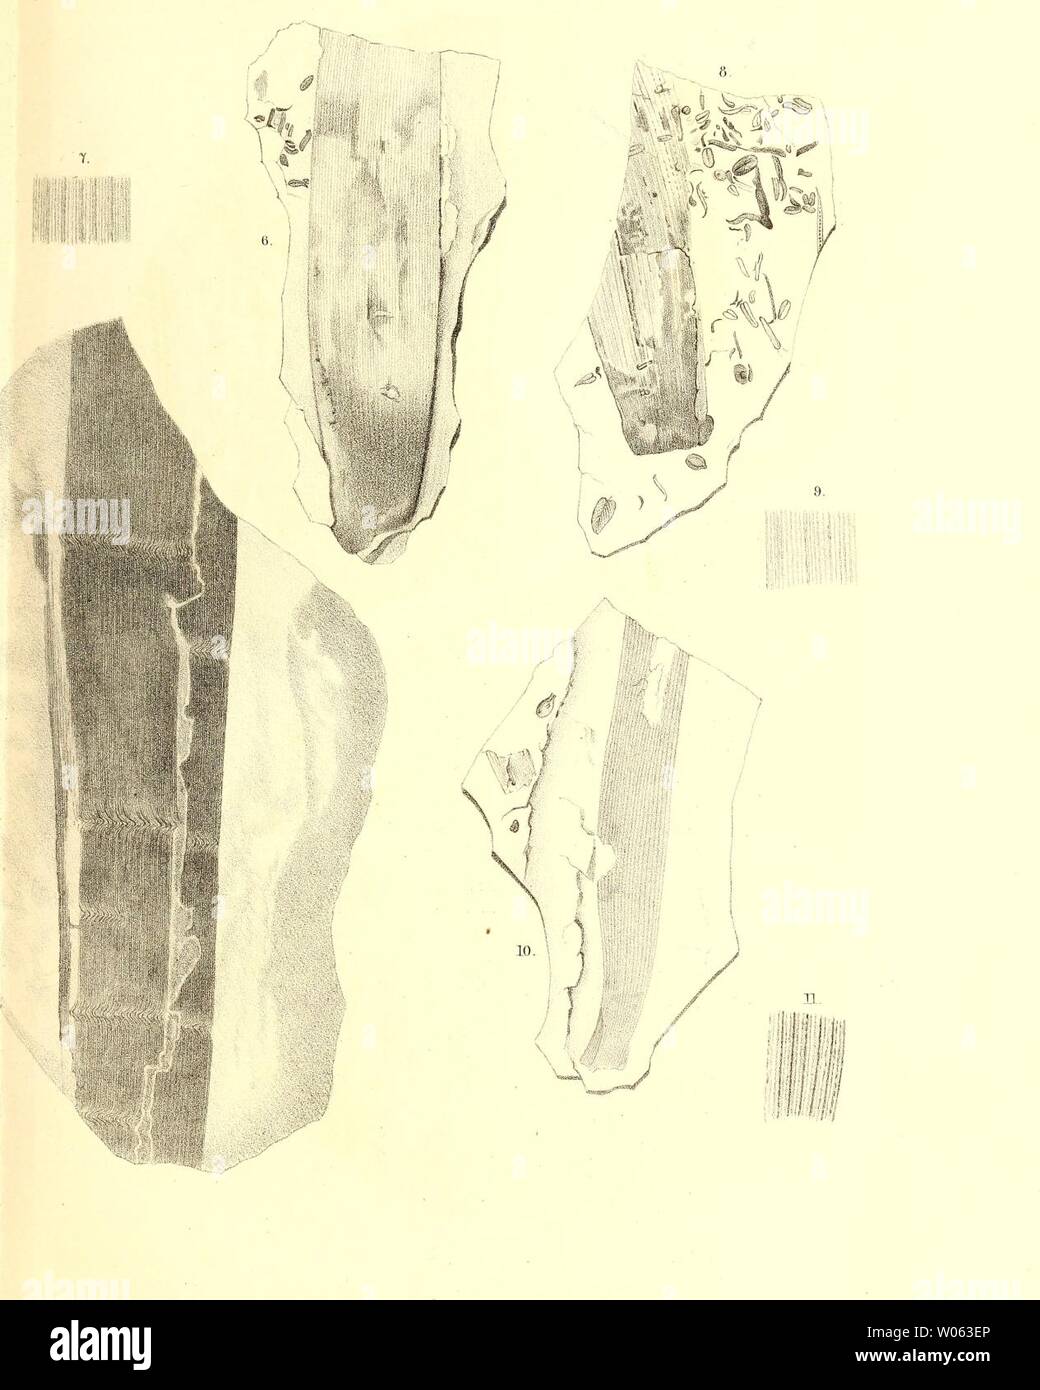 Archive image from page 378 of Die fossile Flora der Permischen. Die fossile Flora der Permischen Formation  diefossileflorad00gppe Year: 1864  Taf. XX1.1    platynervia Göpp. — 6—9, Cordaites prinzipalis Gein, - assifolius Ettingsh. Stock Photo